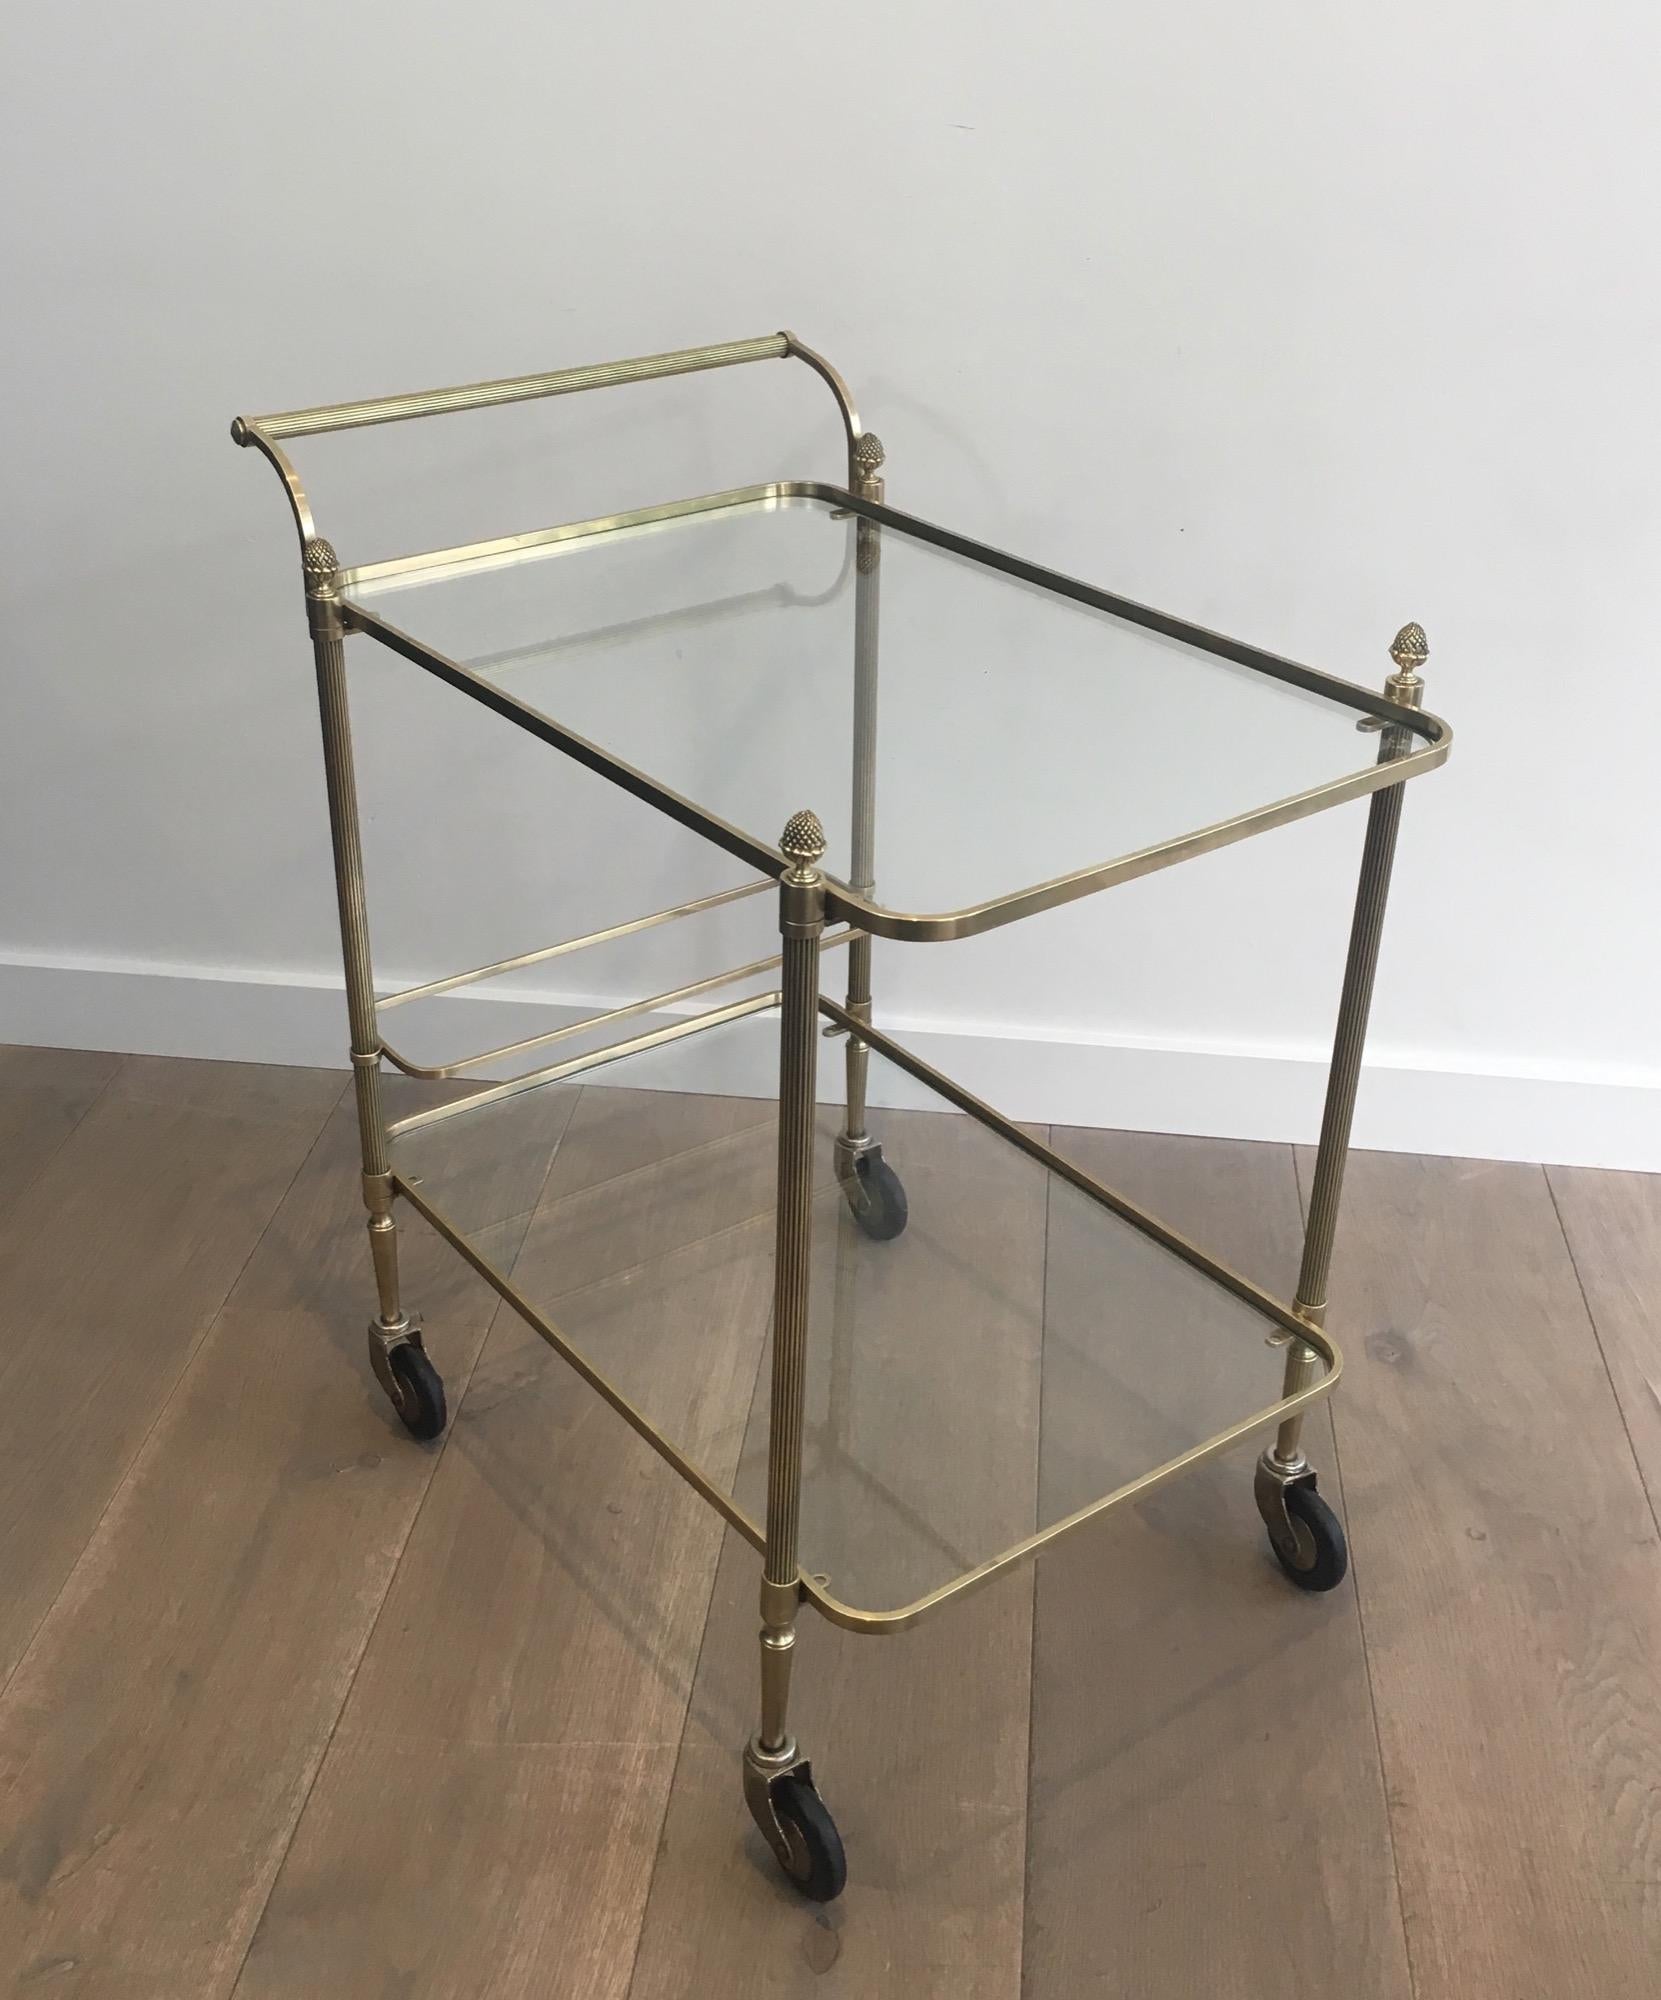 This neoclassical bar cart is made of brass with 4 finials and 2 clear glass shelves. This drinks trolley has a bottles holder on bottom shelf. This is a work by famous French designer Maison Bagués, circa 1940.